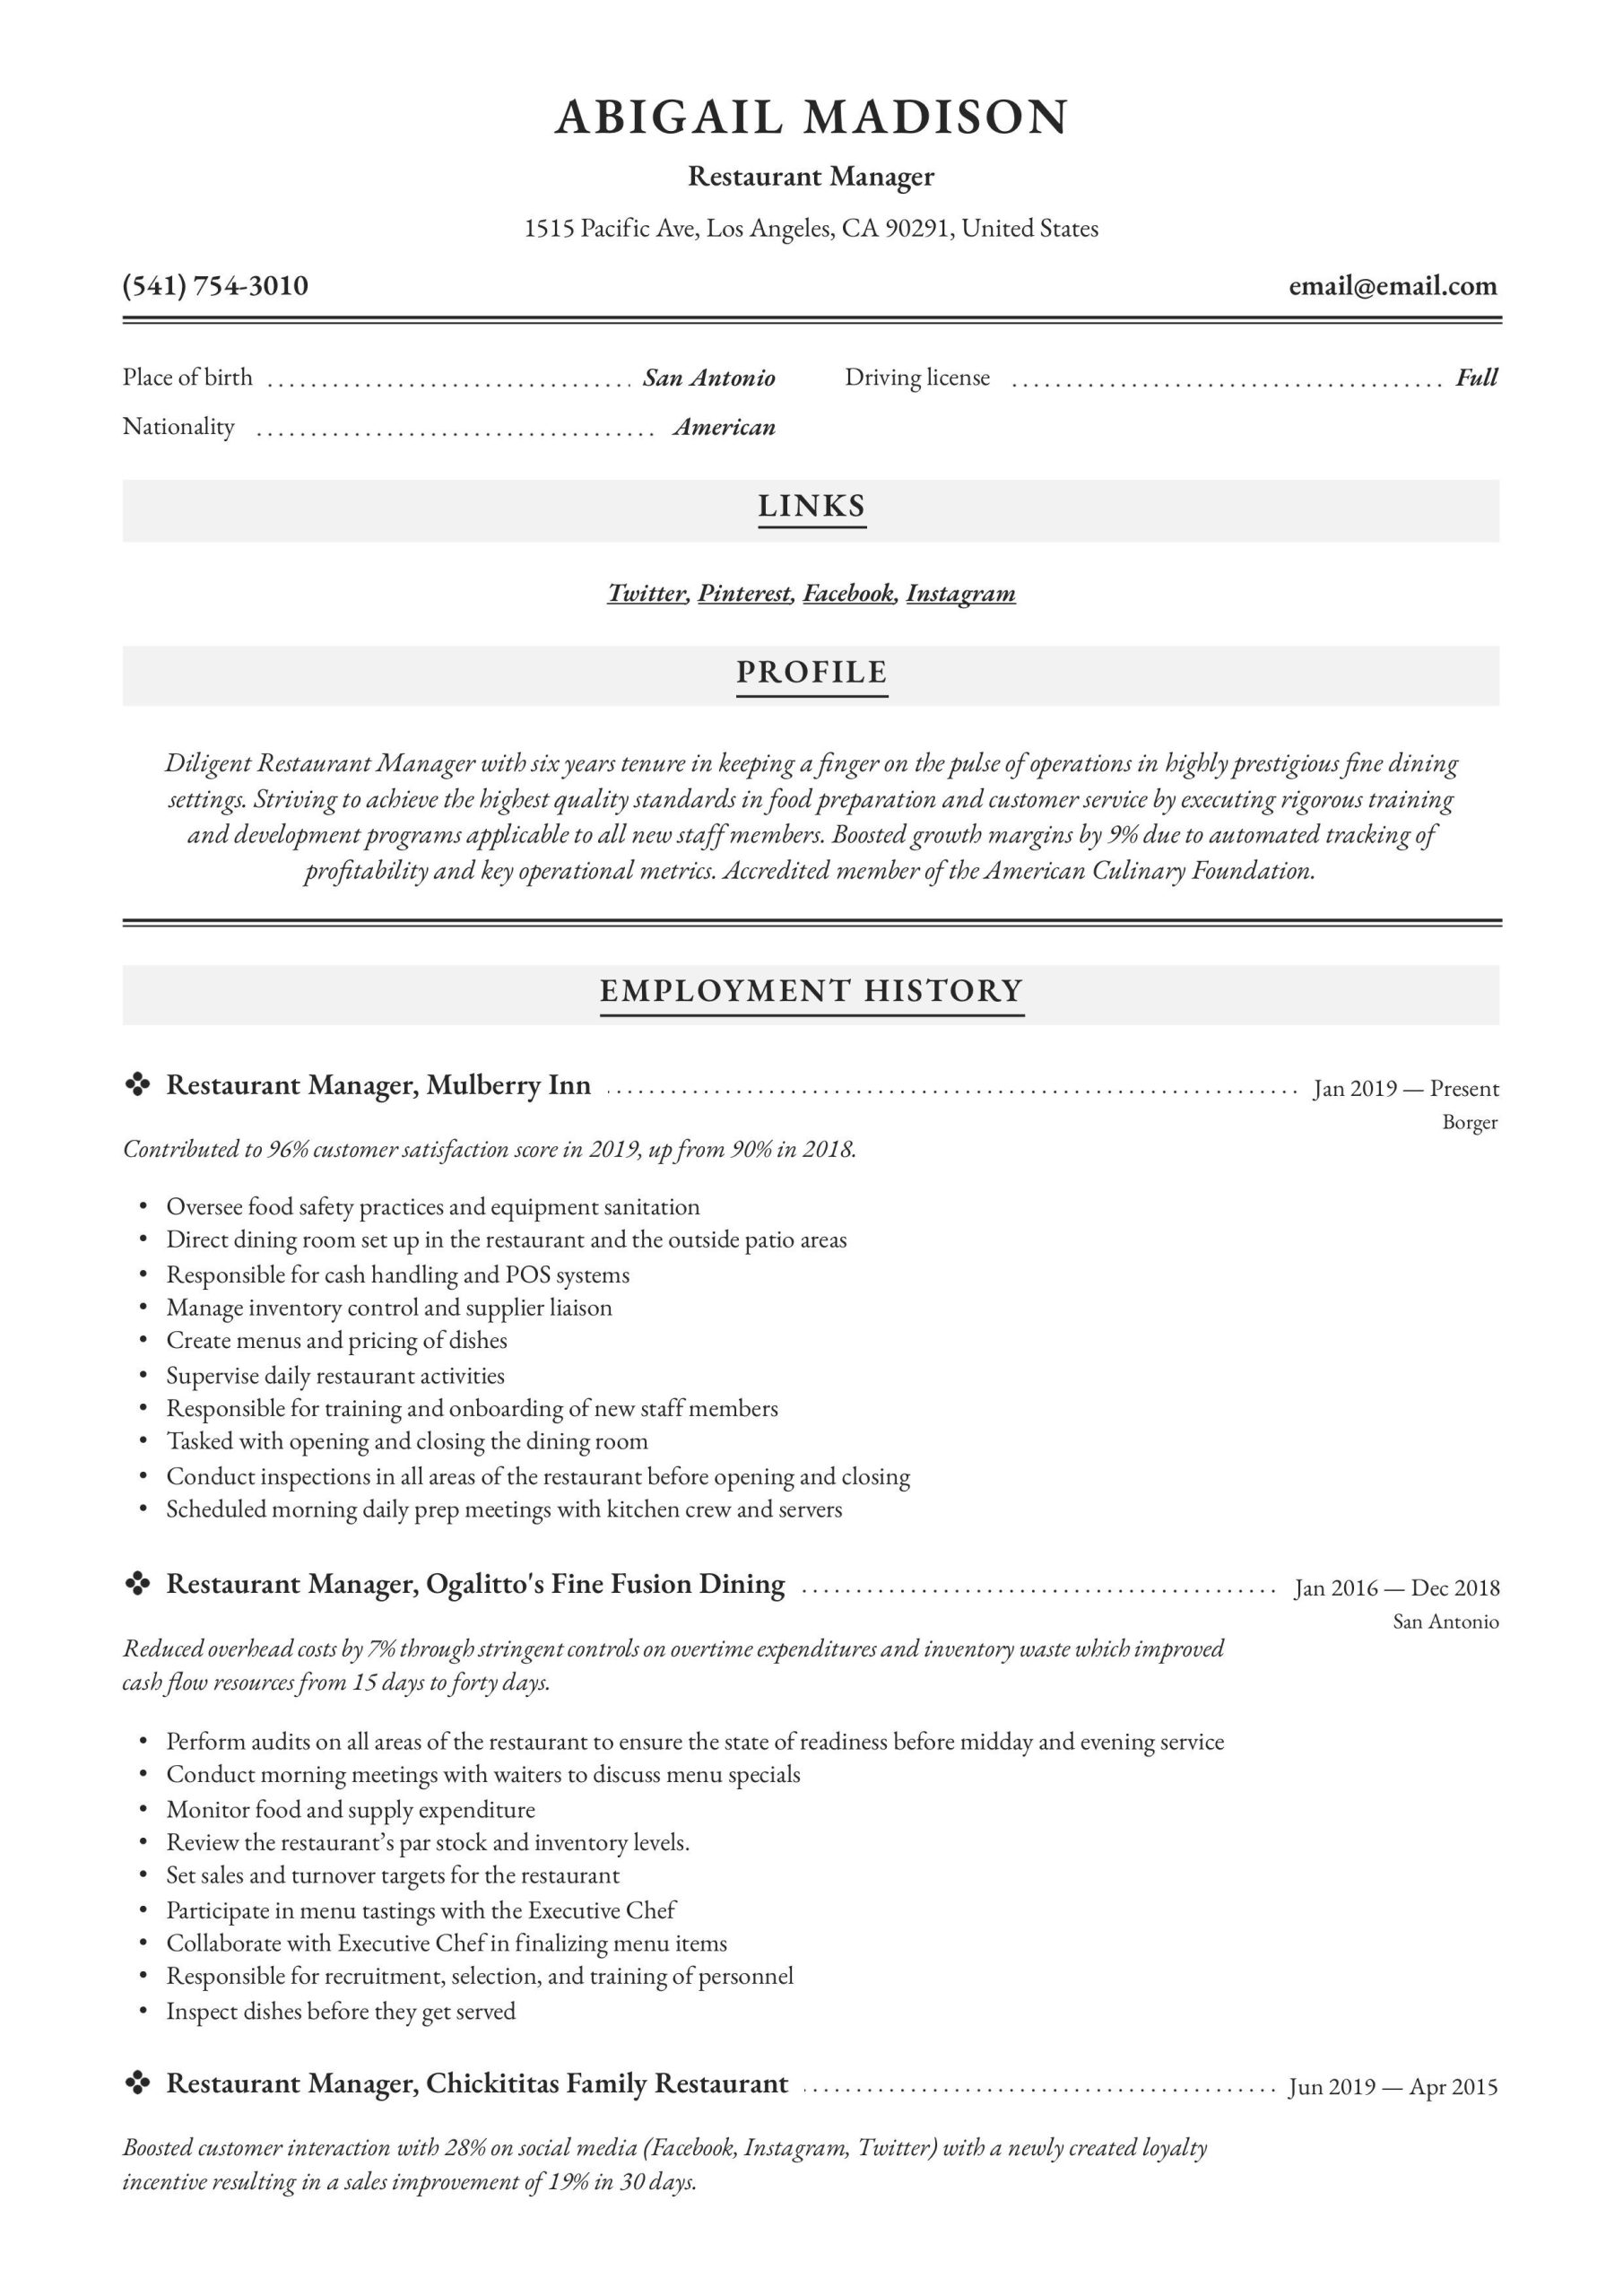 Sample Resumes for Restaurant Manager Position Restaurant Manager Resume Sample Resume Guide, Resume Examples …